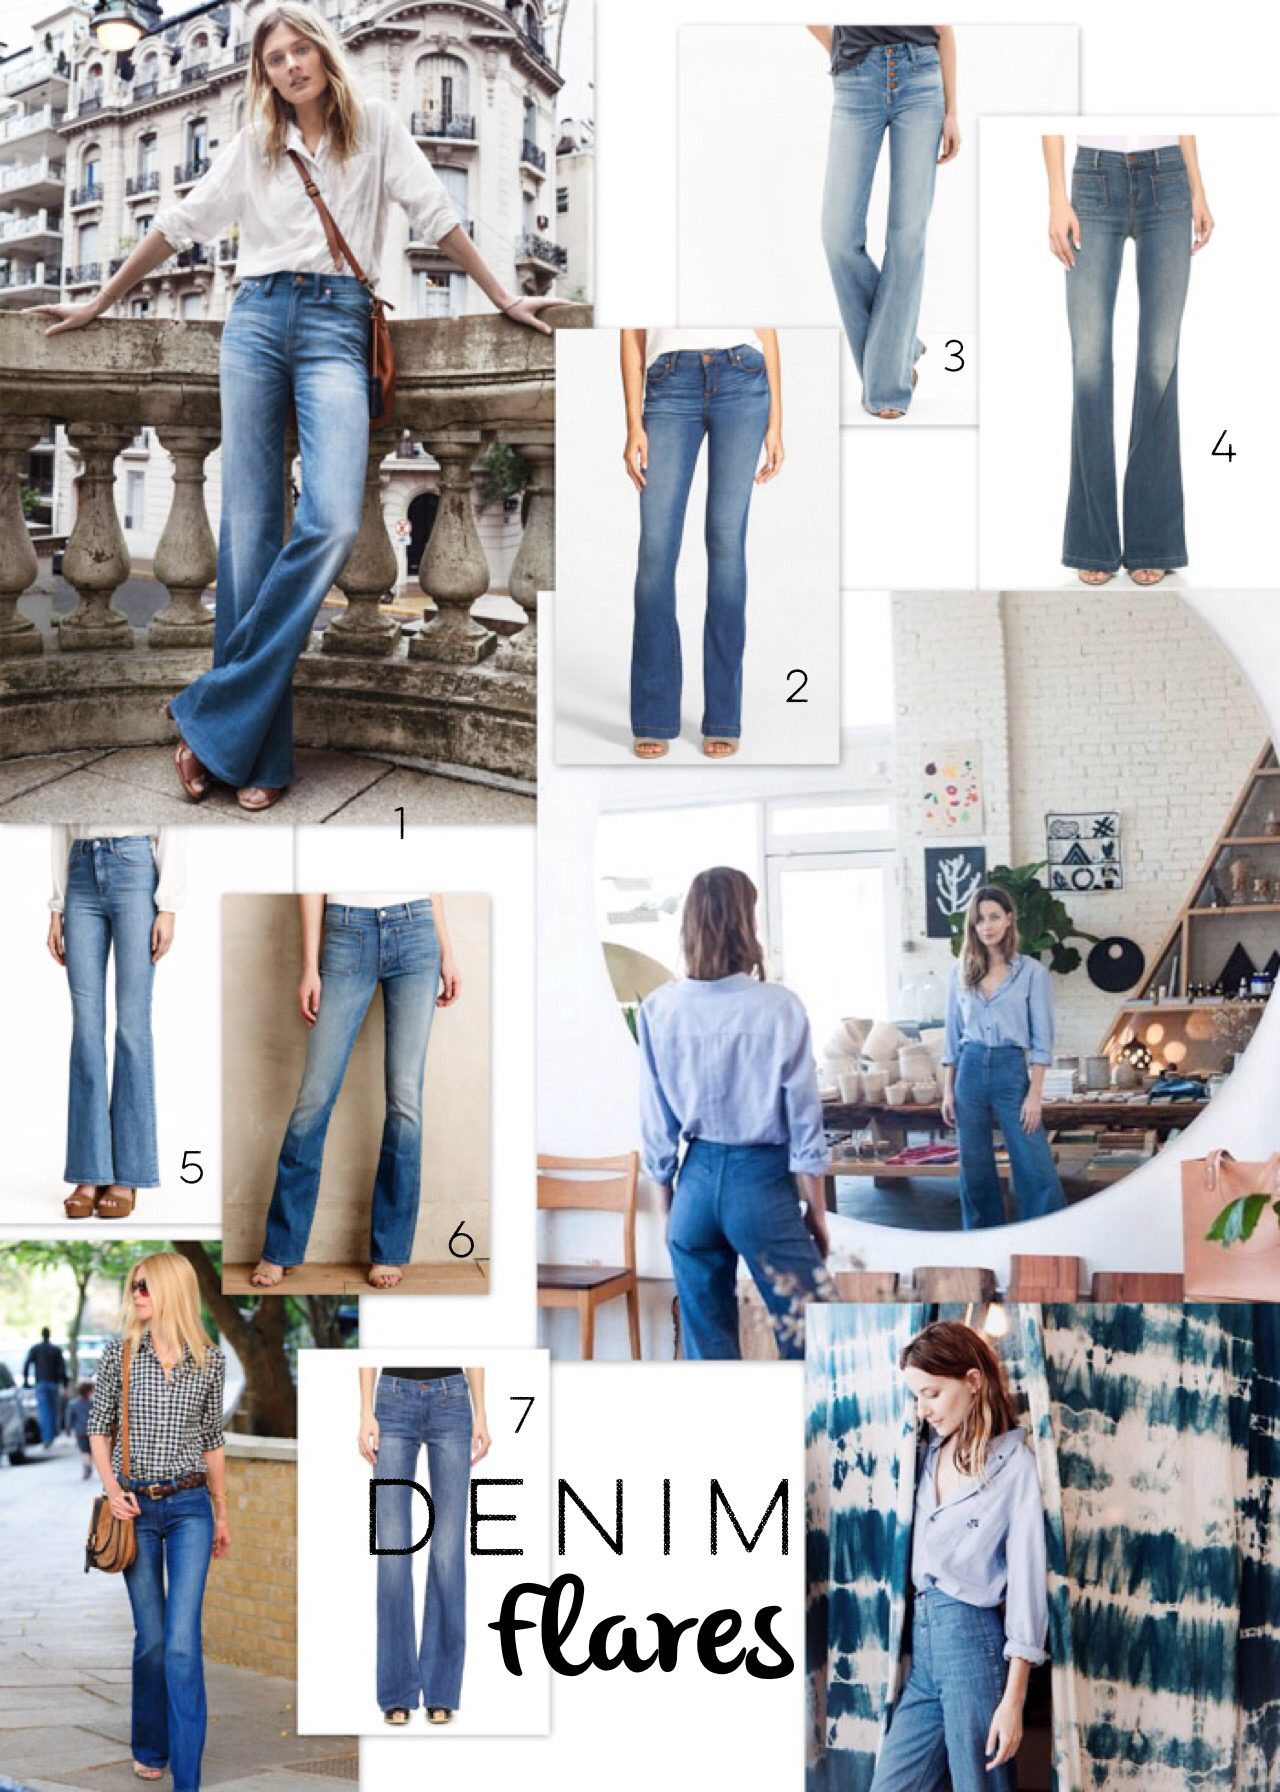 Trend to try? Denim flares - Hither & Thither